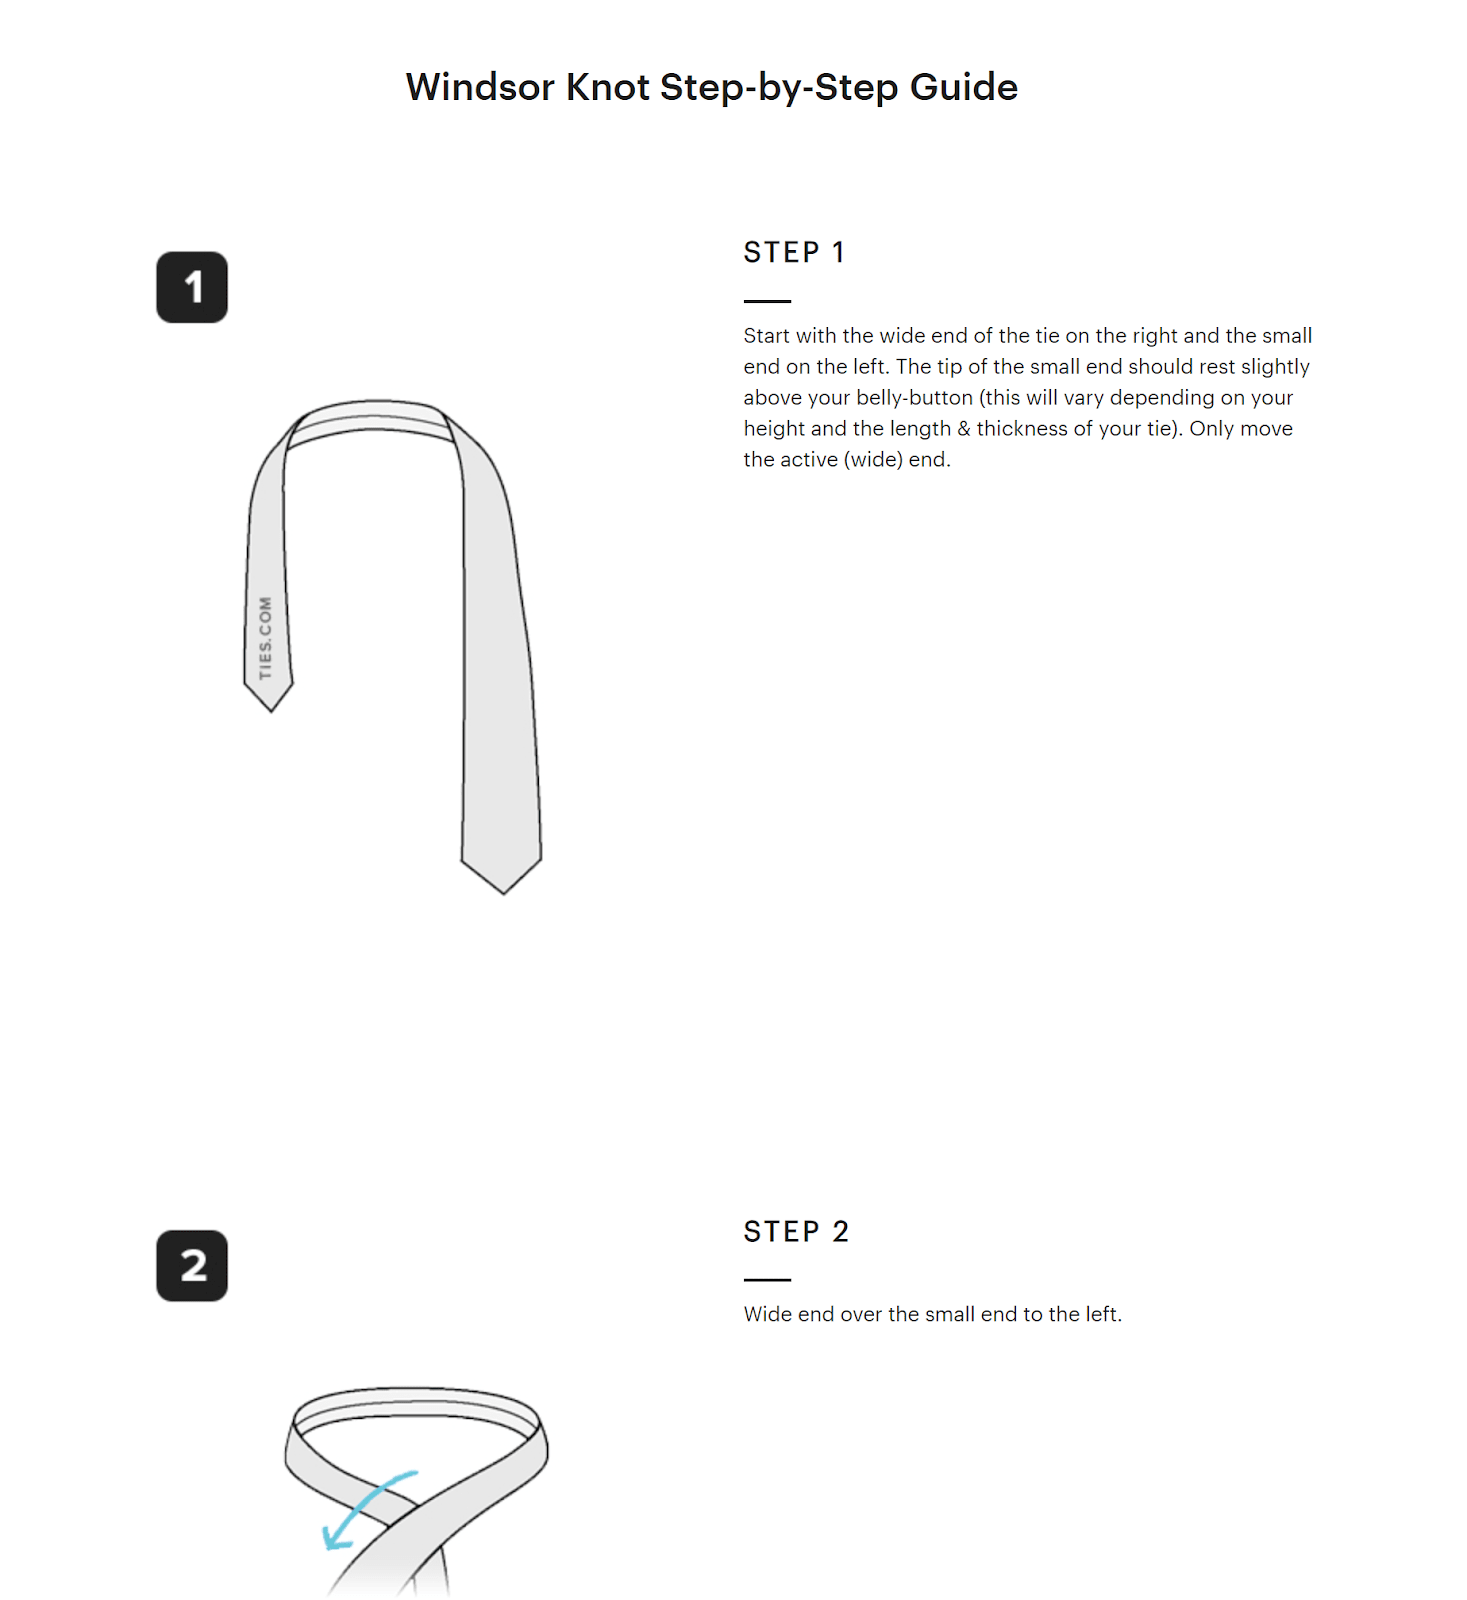 Image and text instructions showing how to tie a Windsor knot.